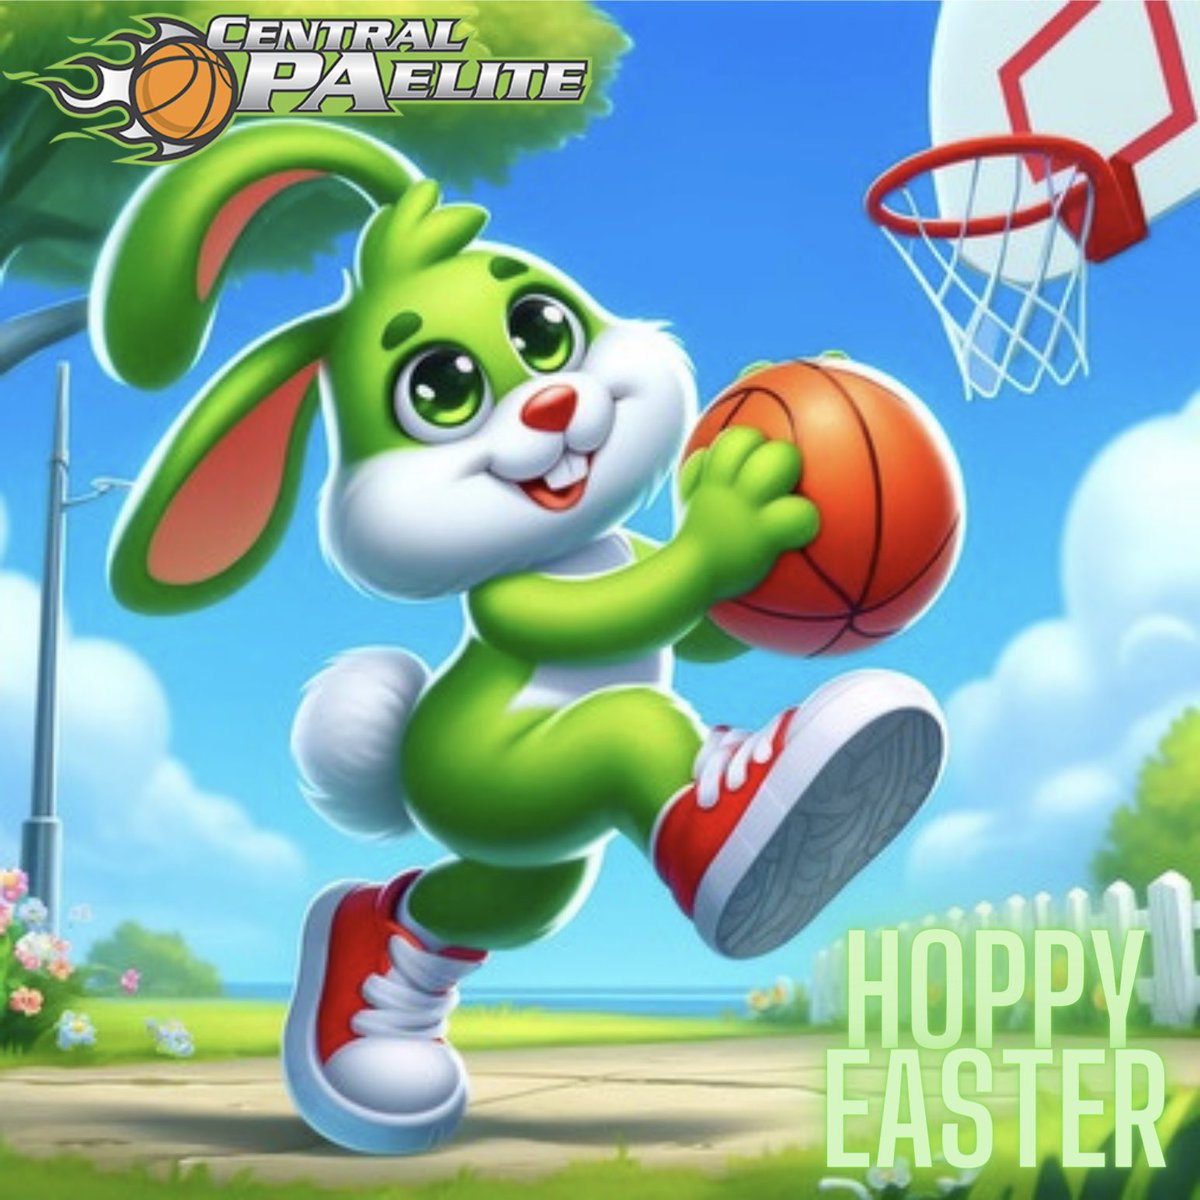 “HOPPY EASTER” from our family to yours!!!